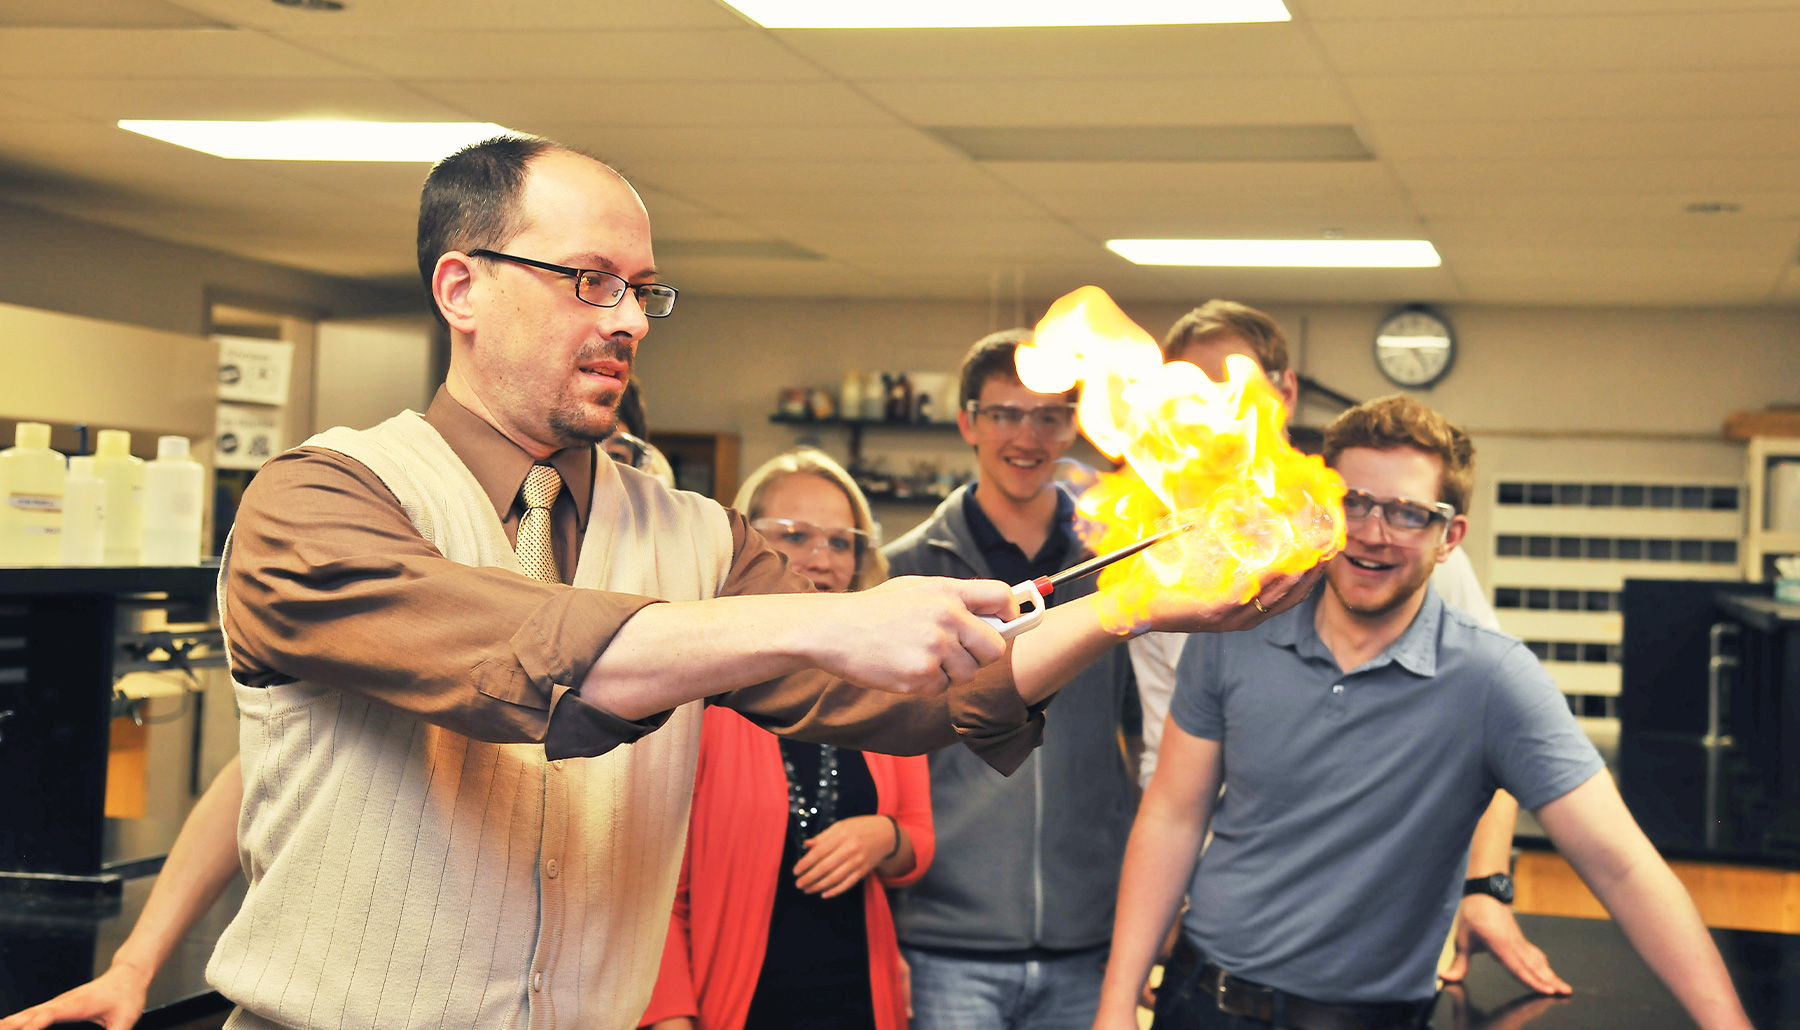 a male professor makes a fireball in his own hand while students watch